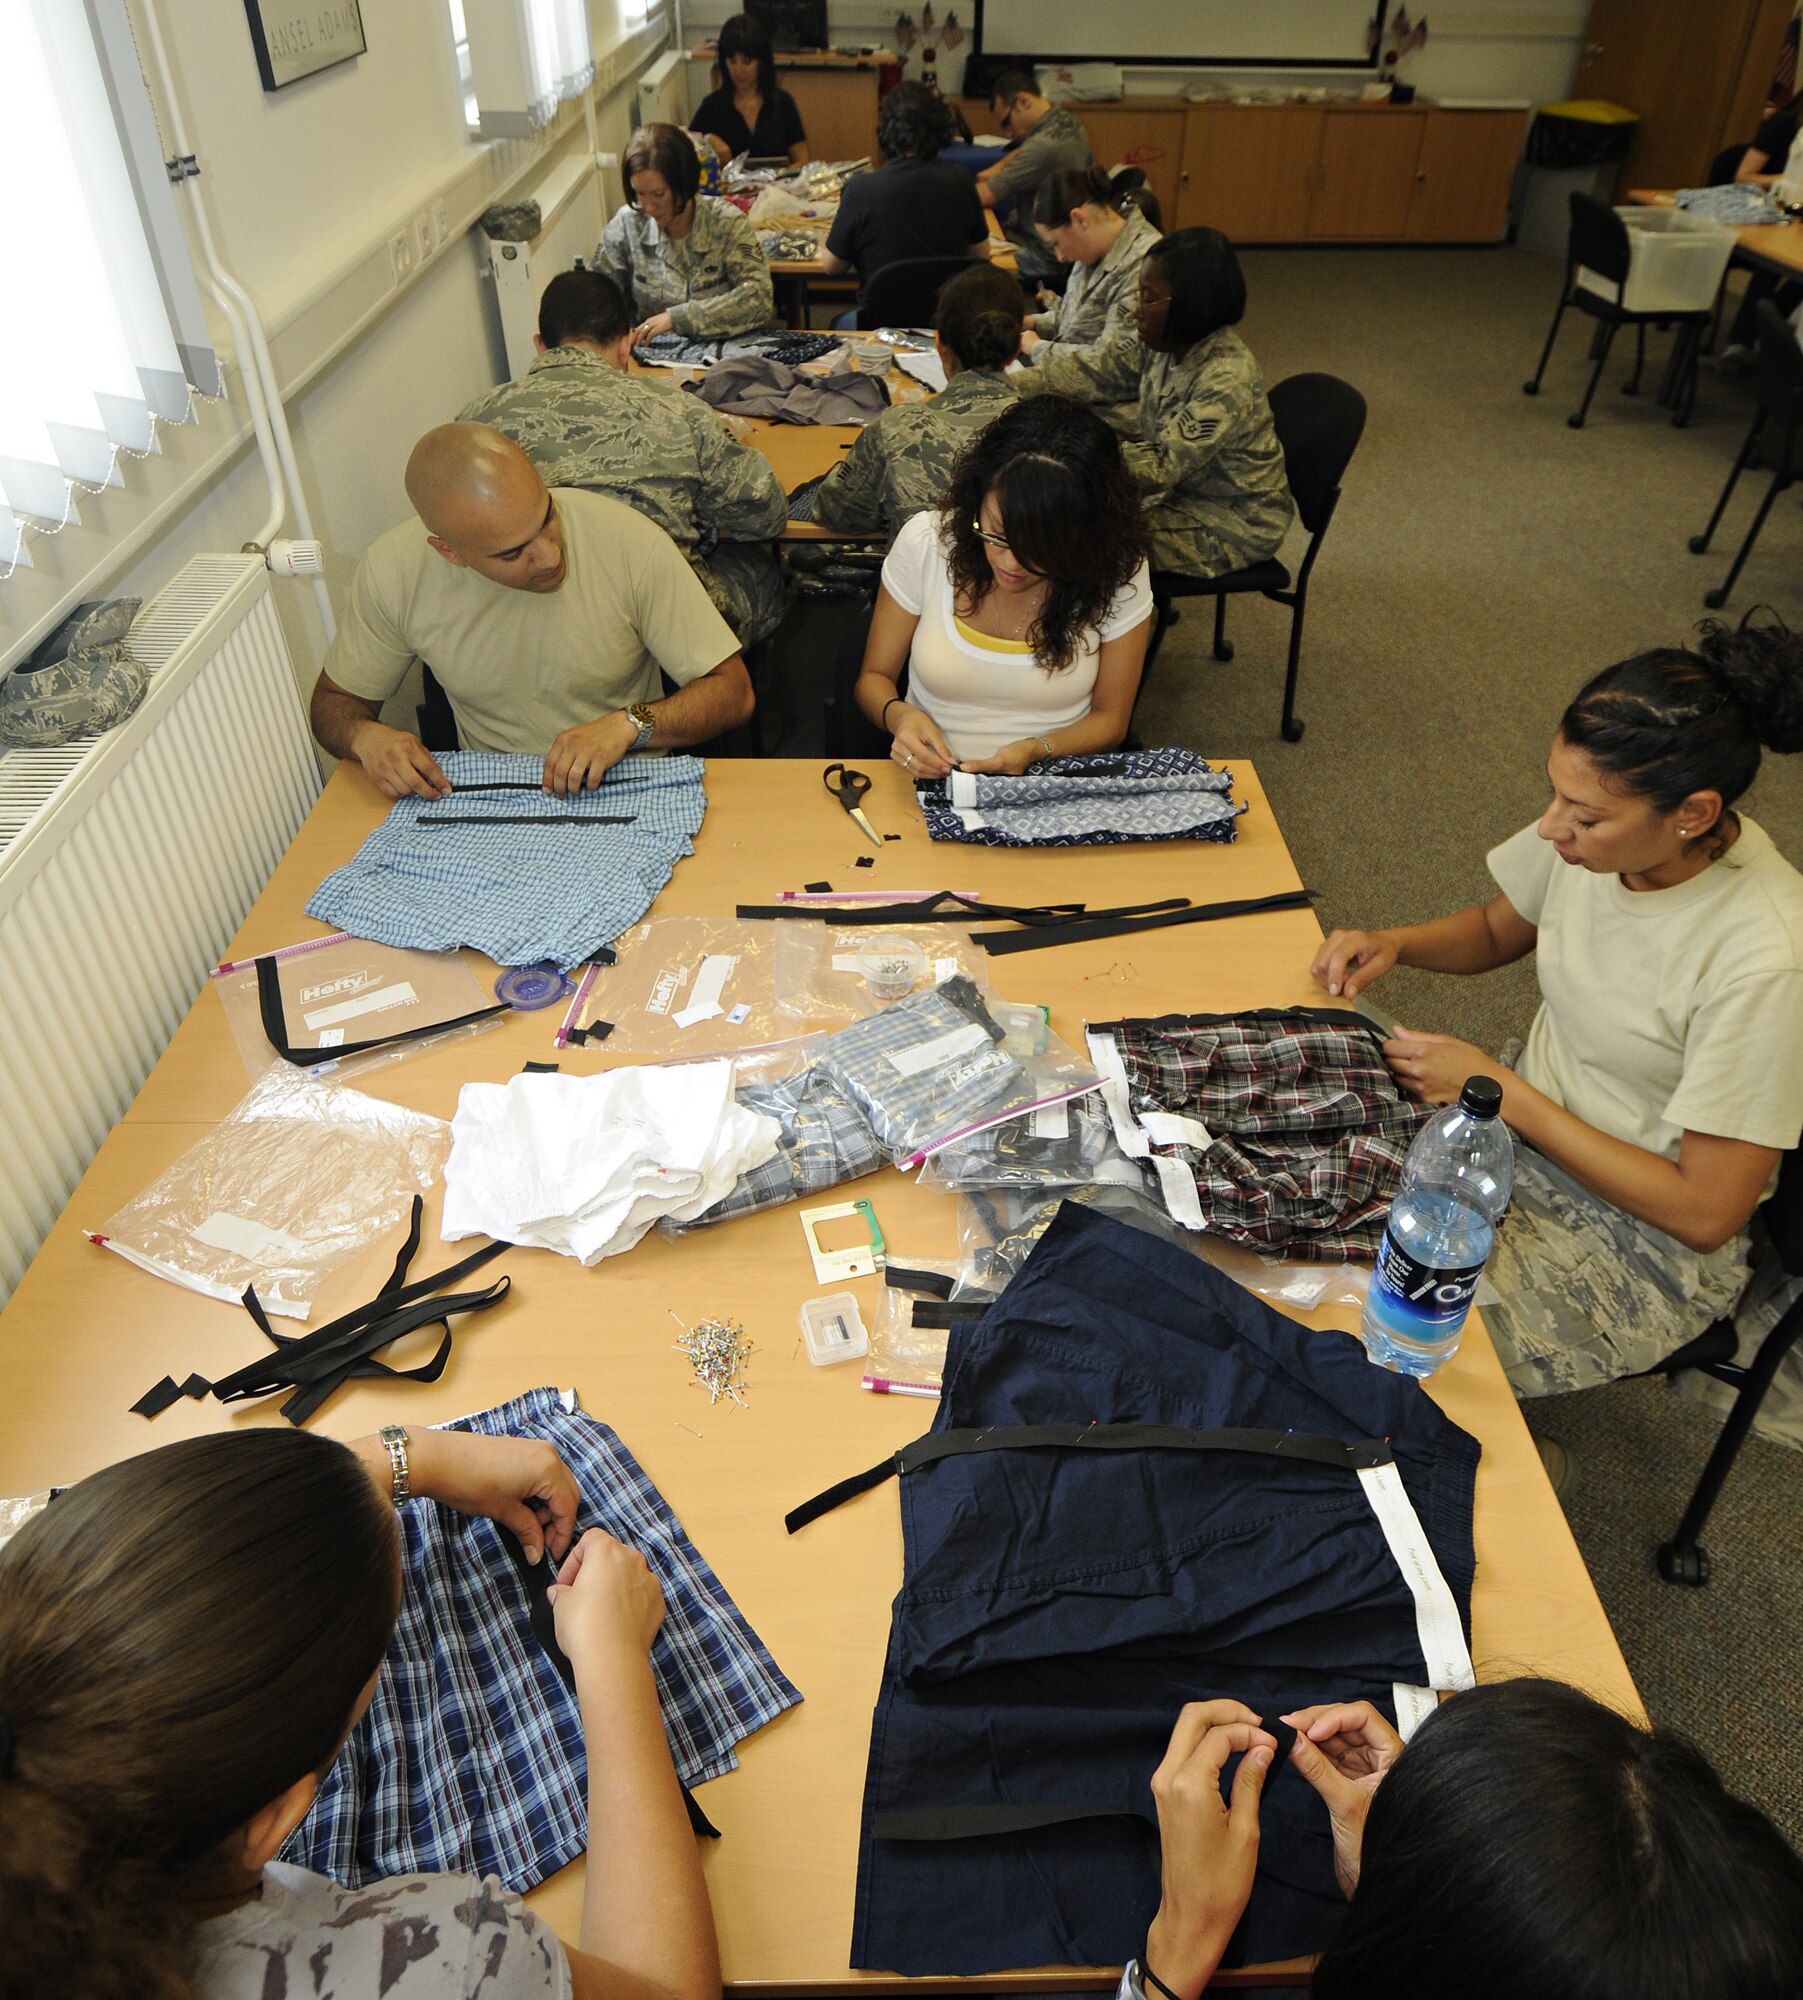 SPANGDAHLEM AIR BASE, Germany -Spangdahlem Air Base people work to adapt boxers while volunteering for "Sew Much Comfort" July 31. Twenty-five volunteers worked from 9:30 a.m. to 2:30 p.m. to assemble 60 pairs of boxers while 22 pairs were completed. Since the program started in October 2008 more than 150 pairs of boxers have been completed to send to Landstuhl Regional Medical Center's chaplain's closet, where they will be available to wounded warriors.  (U.S. Air Force photo by Senior Airman Benjamin Wilson)